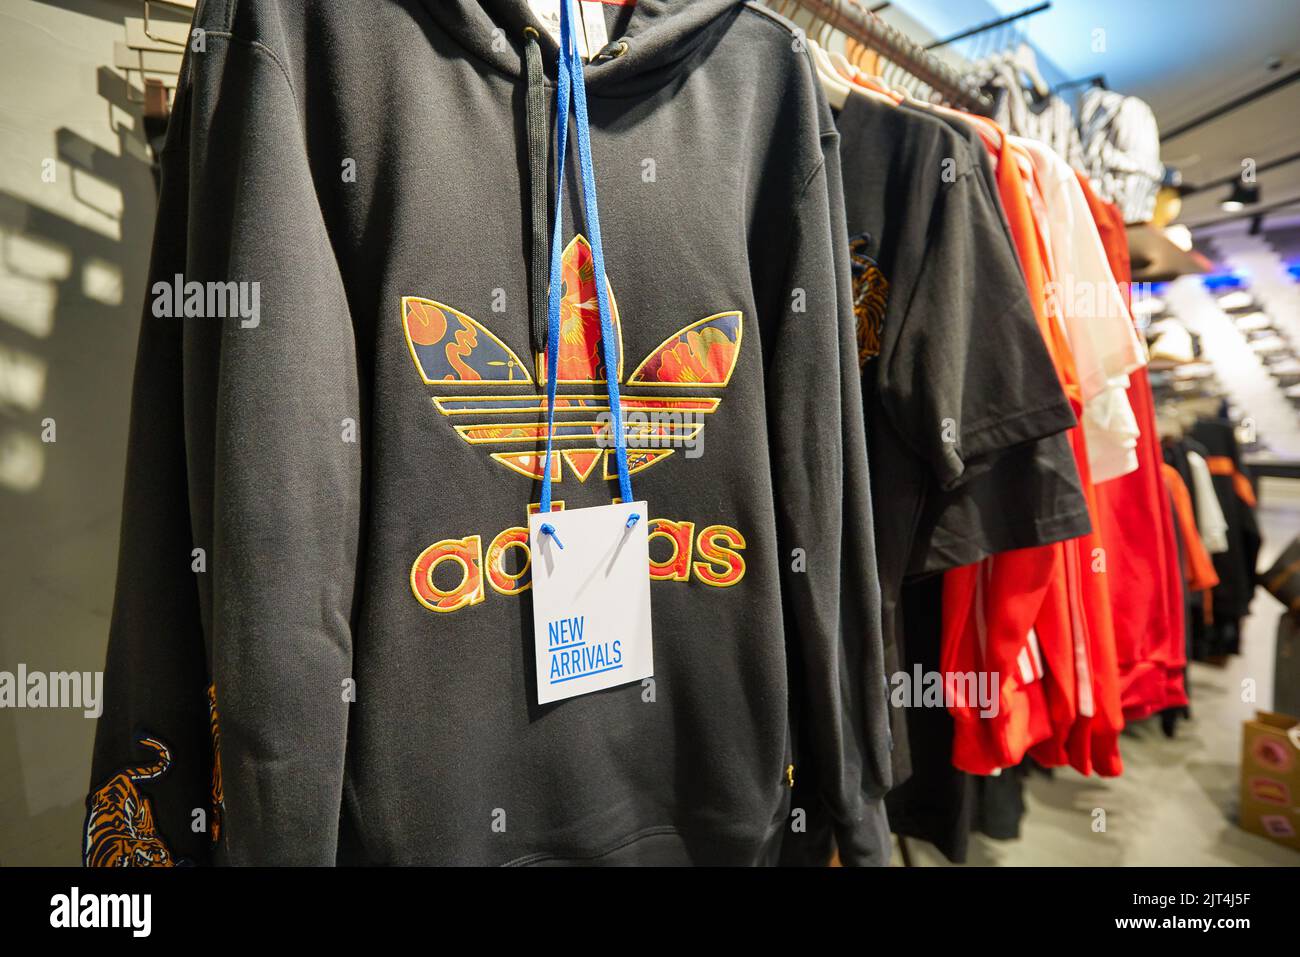 SINGAPORE - CIRCA JANUARY, 2020: clothes on display at Adidas store in Singapore Changi Airport. Stock Photo